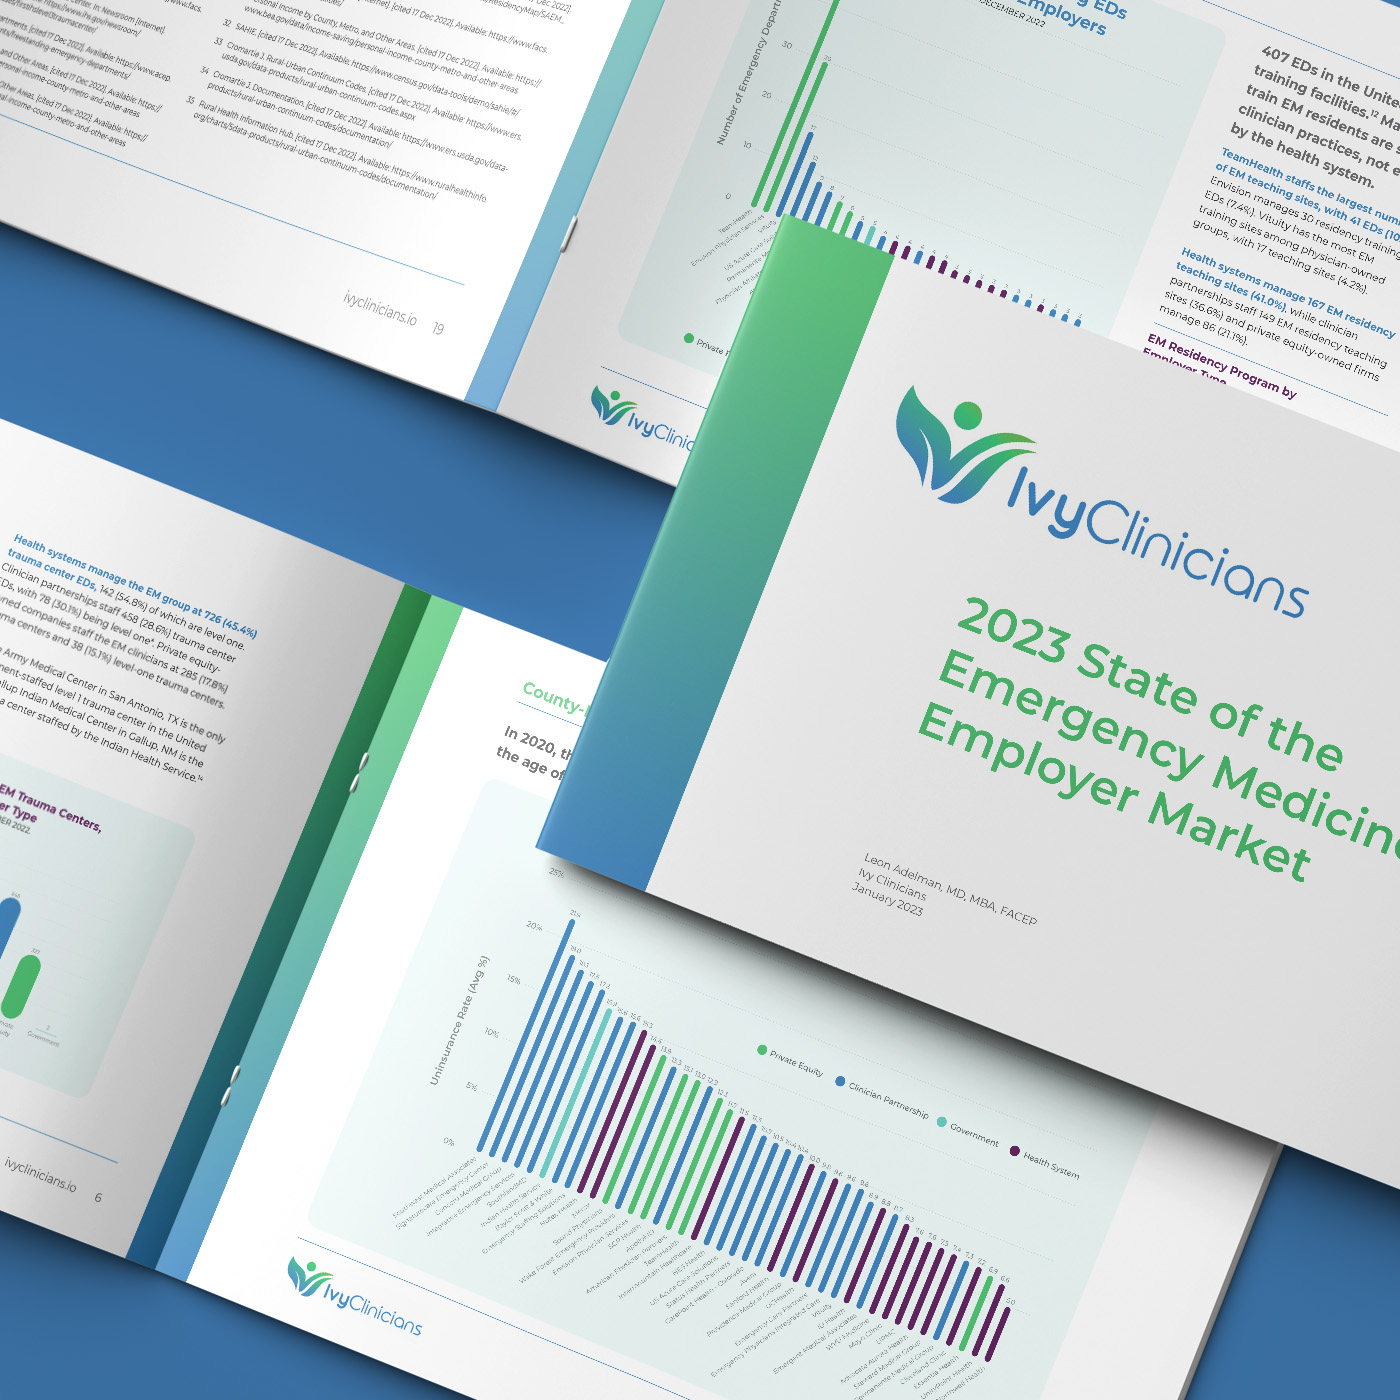 White Paper Design for Ivy Clinicians